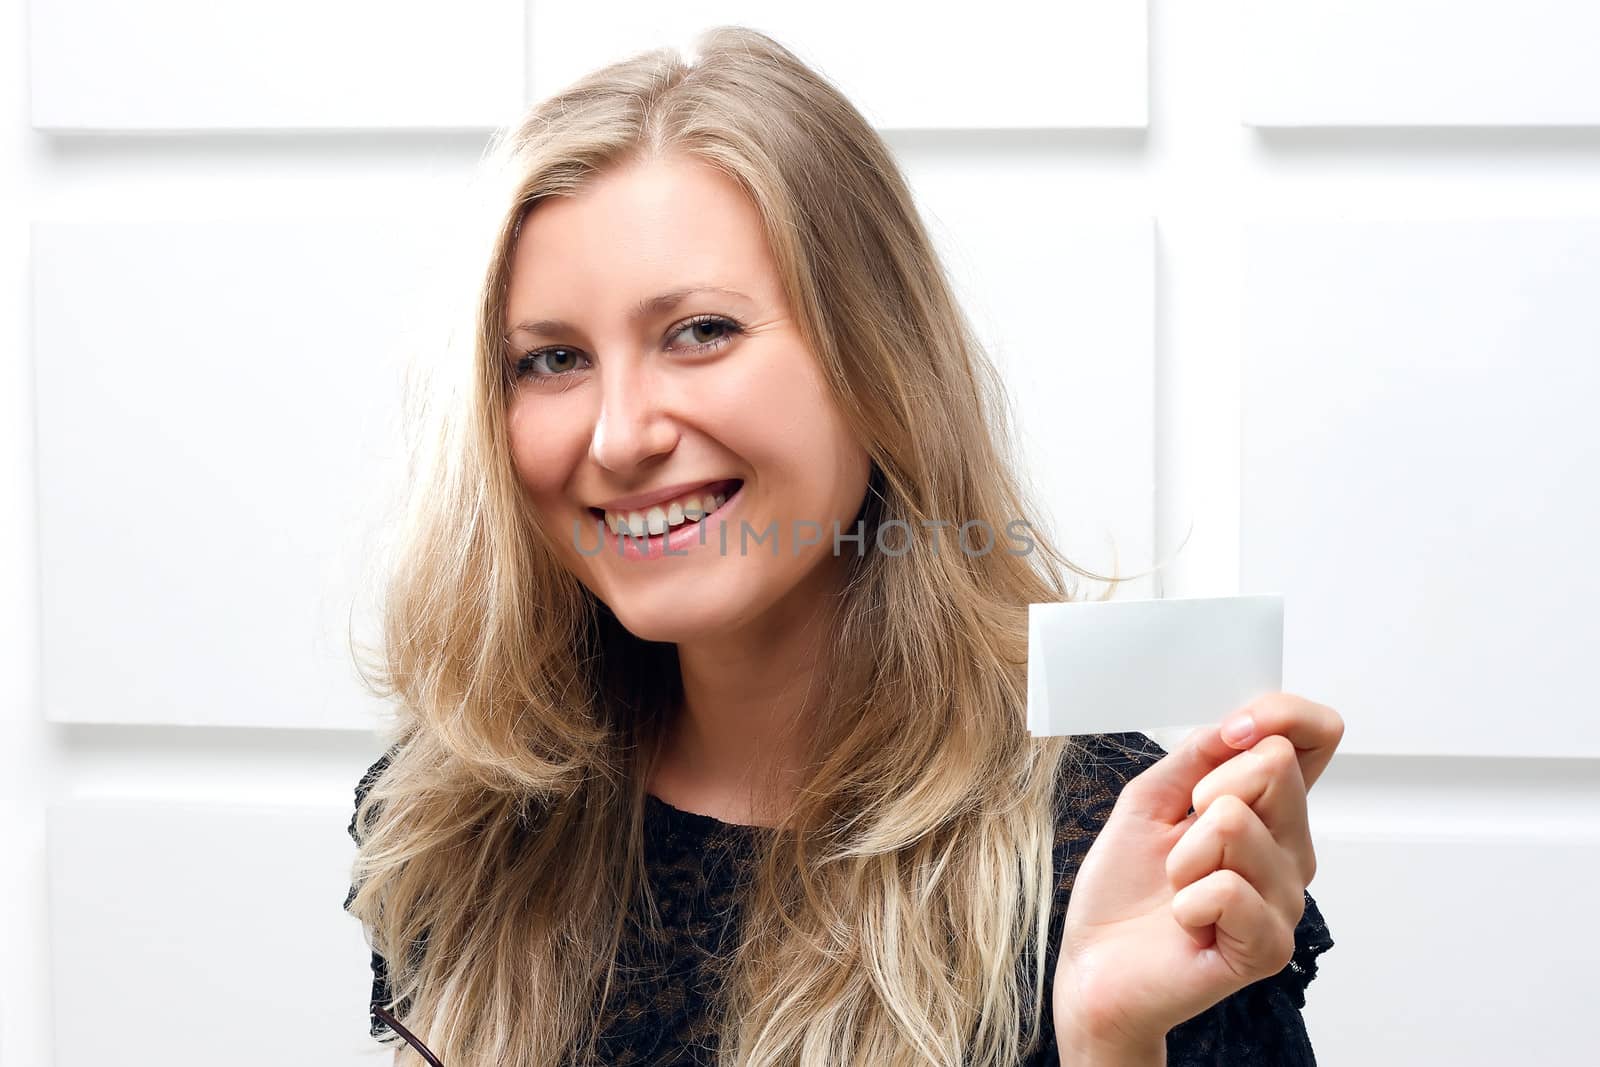 Portrait of smiling business woman giving blank business card